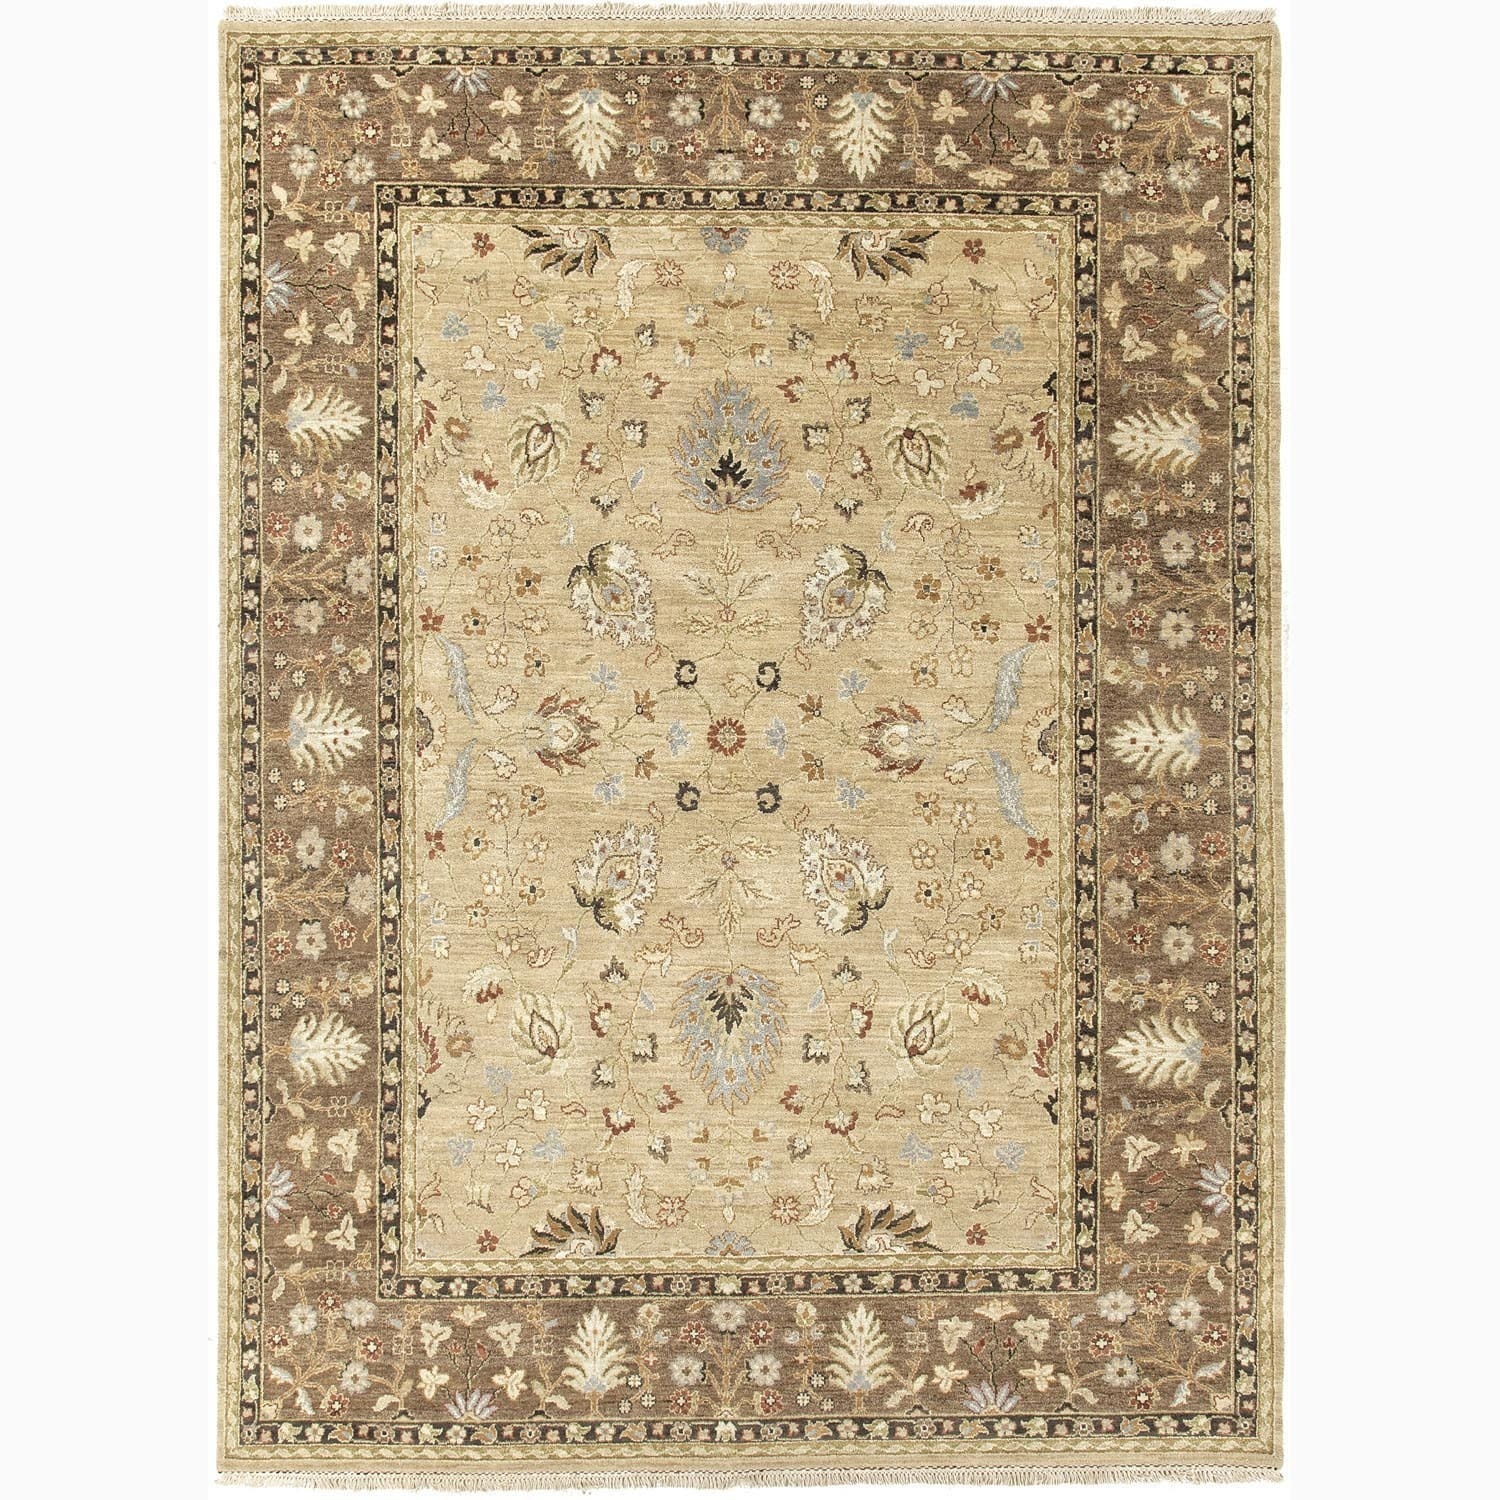 Hand made Oriental Pattern Taupe/ Brown Wool Rug (6x9)